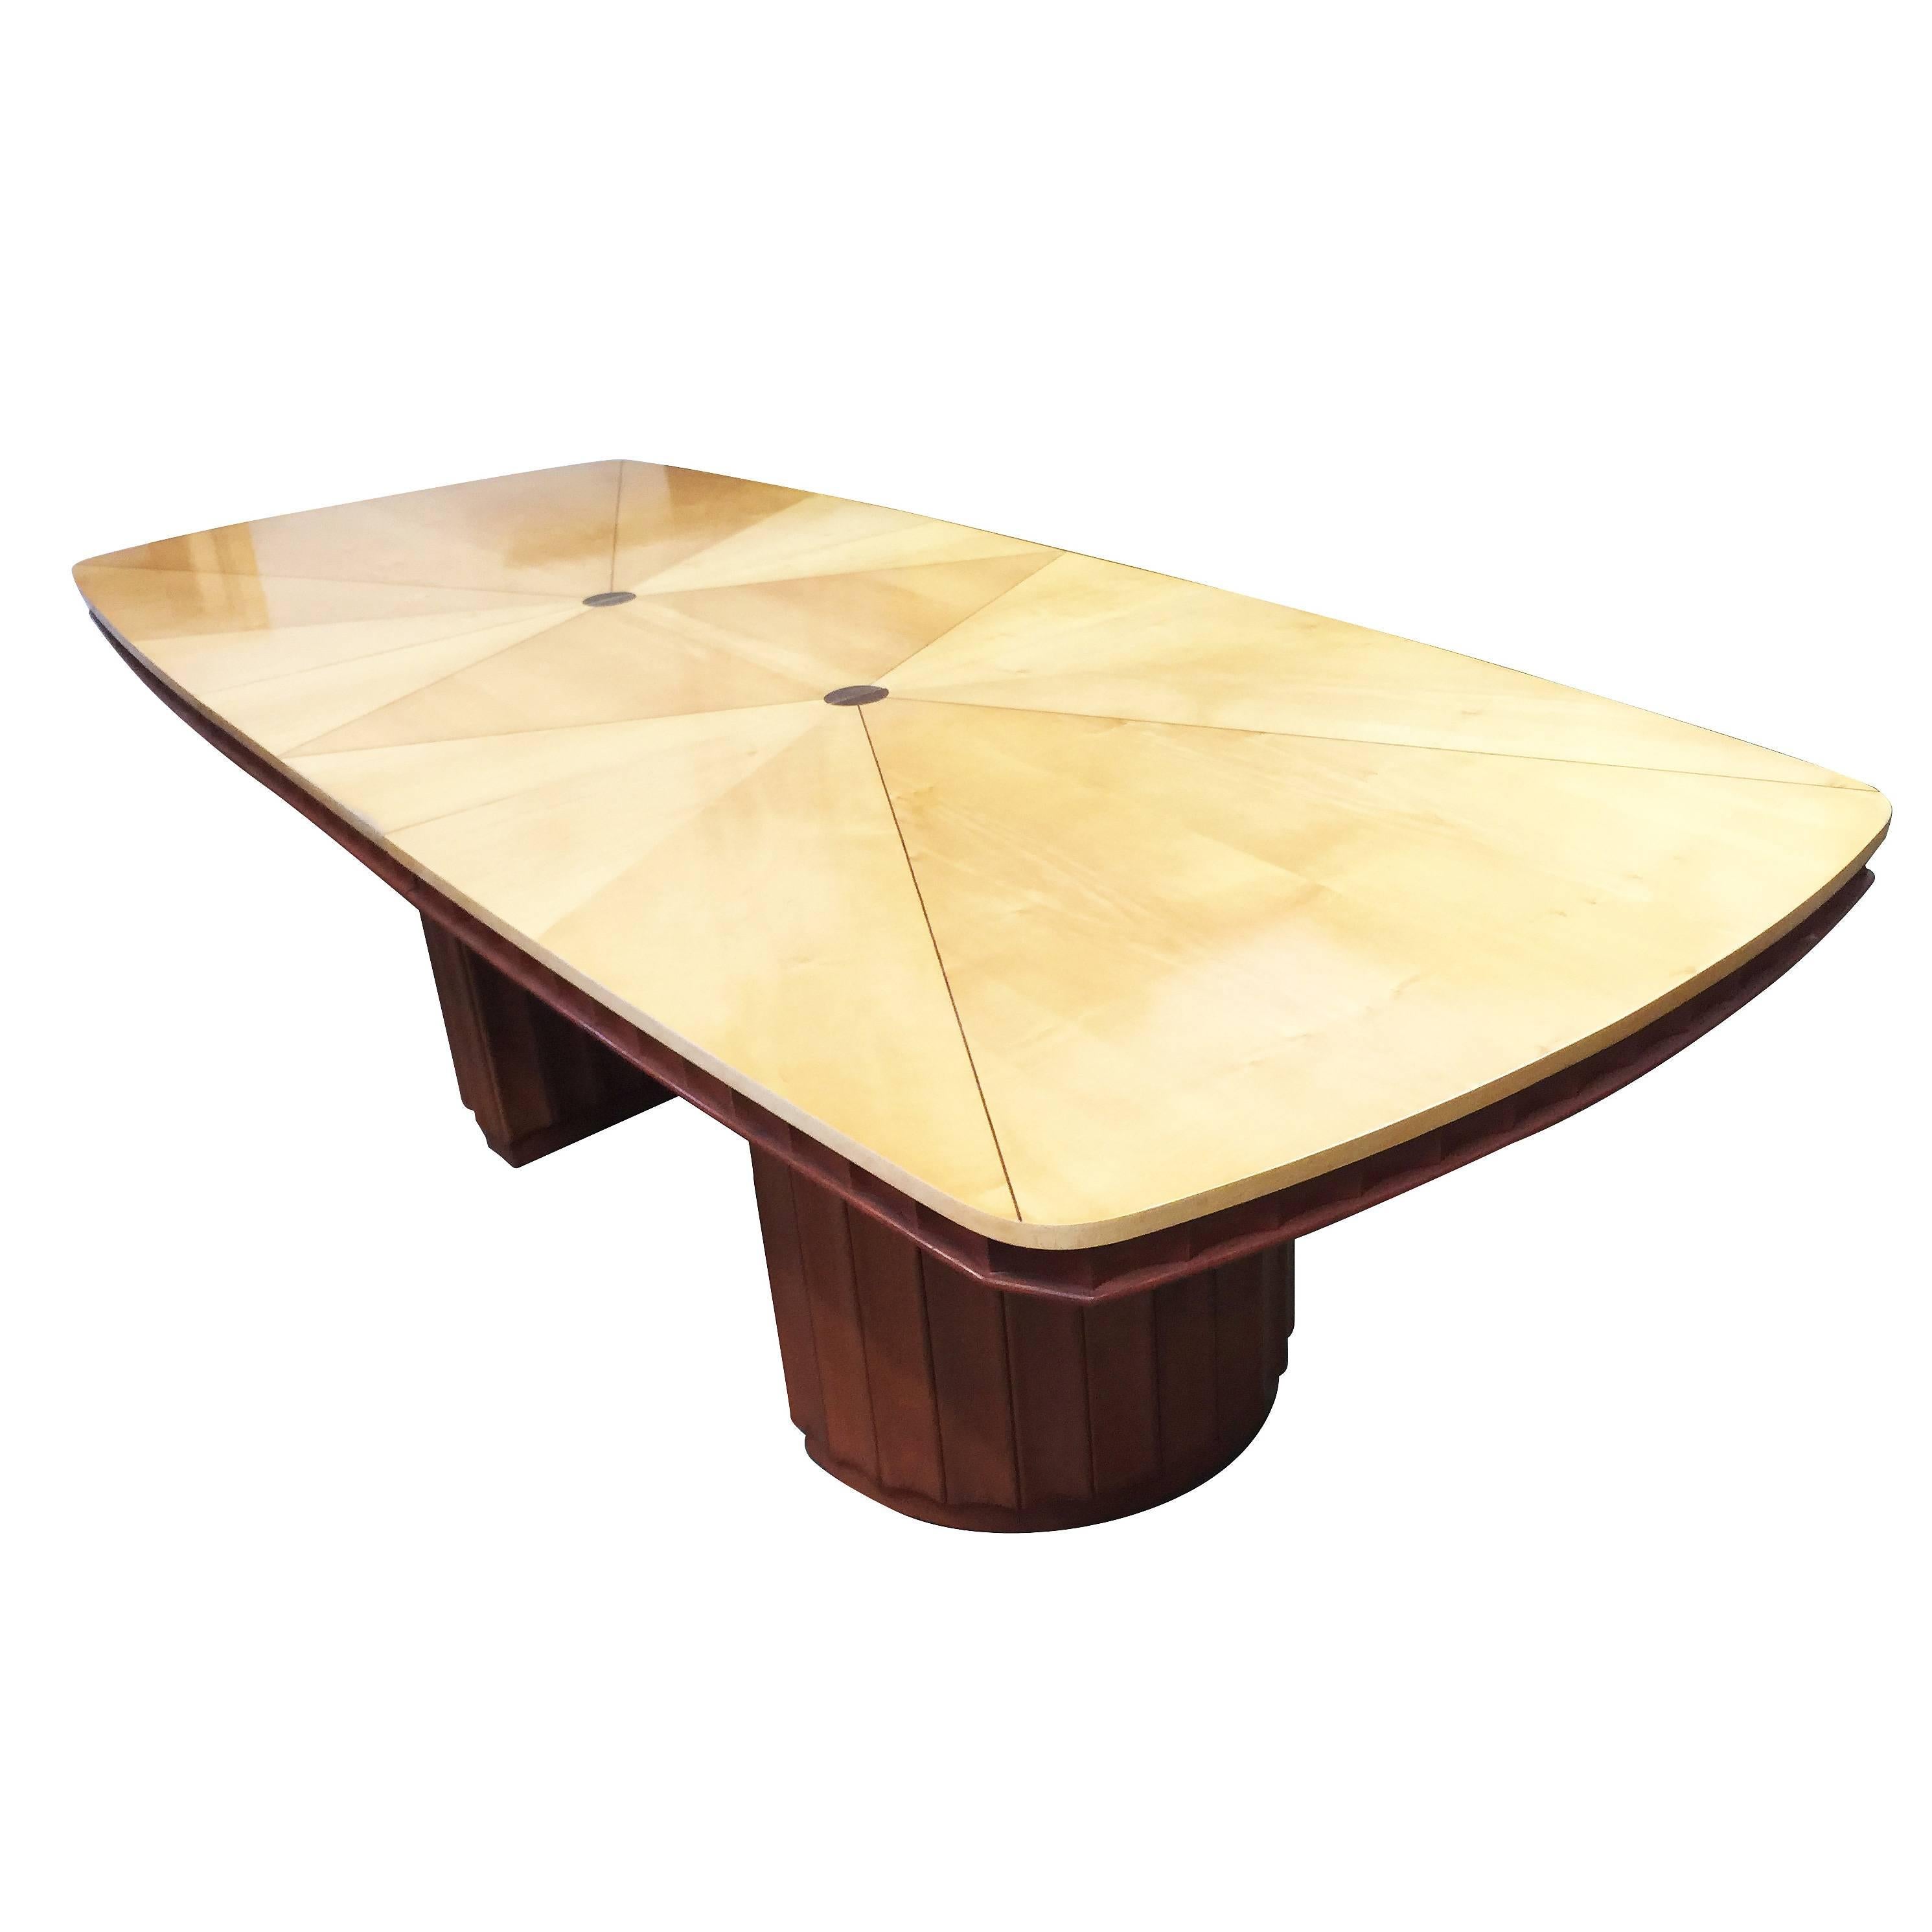 Eliel Saarinen Style Dining Table with Sculpted Bases and Inlay Top In Excellent Condition For Sale In Van Nuys, CA